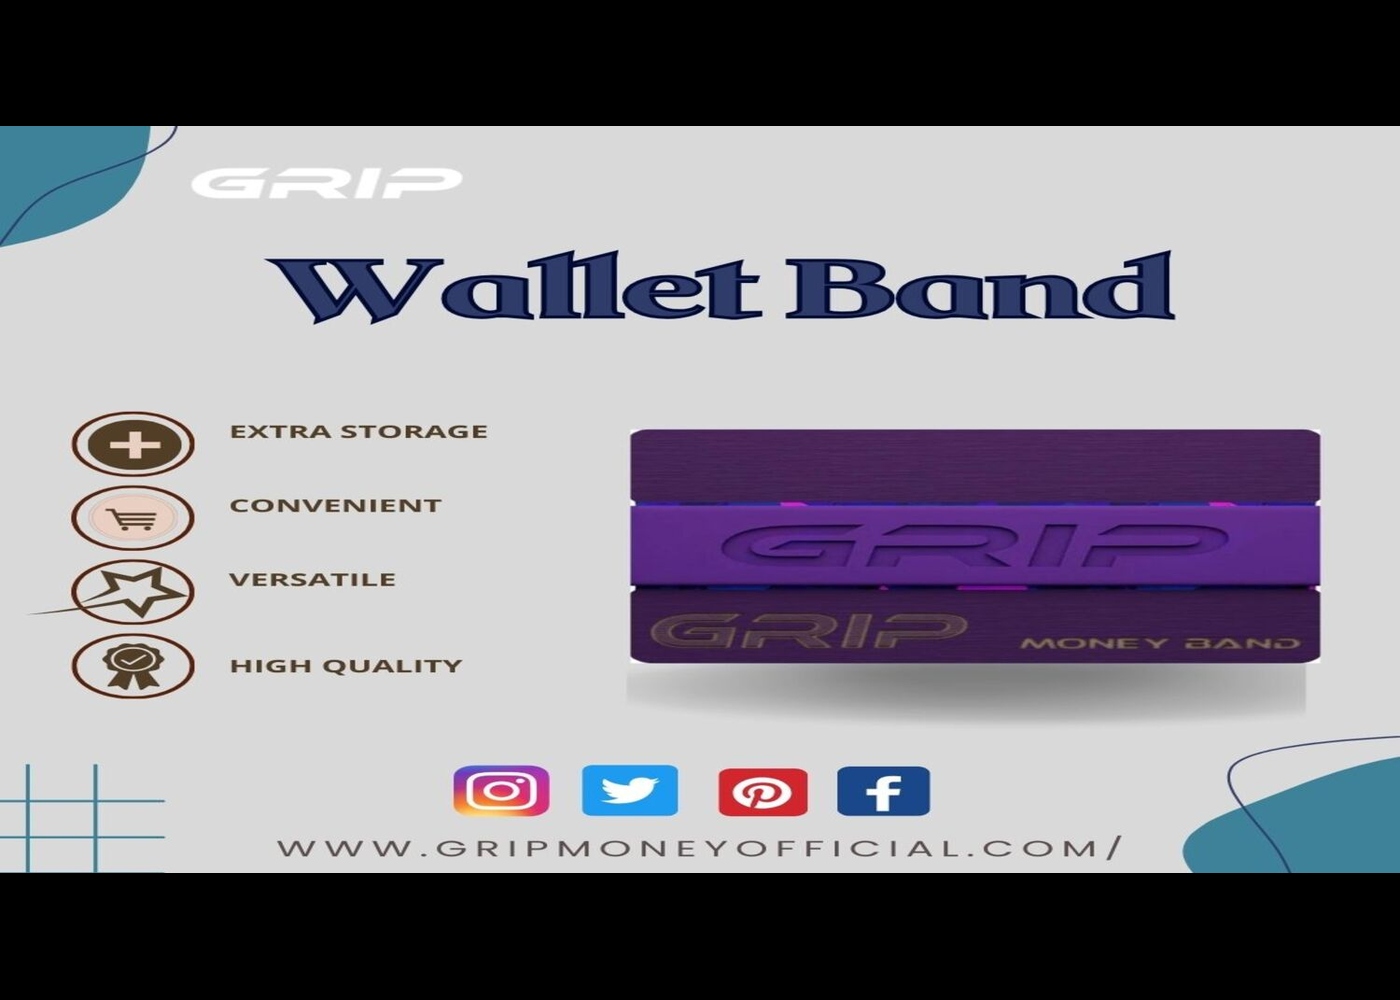  The Ultimate Guide To Choosing the Right Wallet Band To Secure Your Cash & Card | Grip Money Official